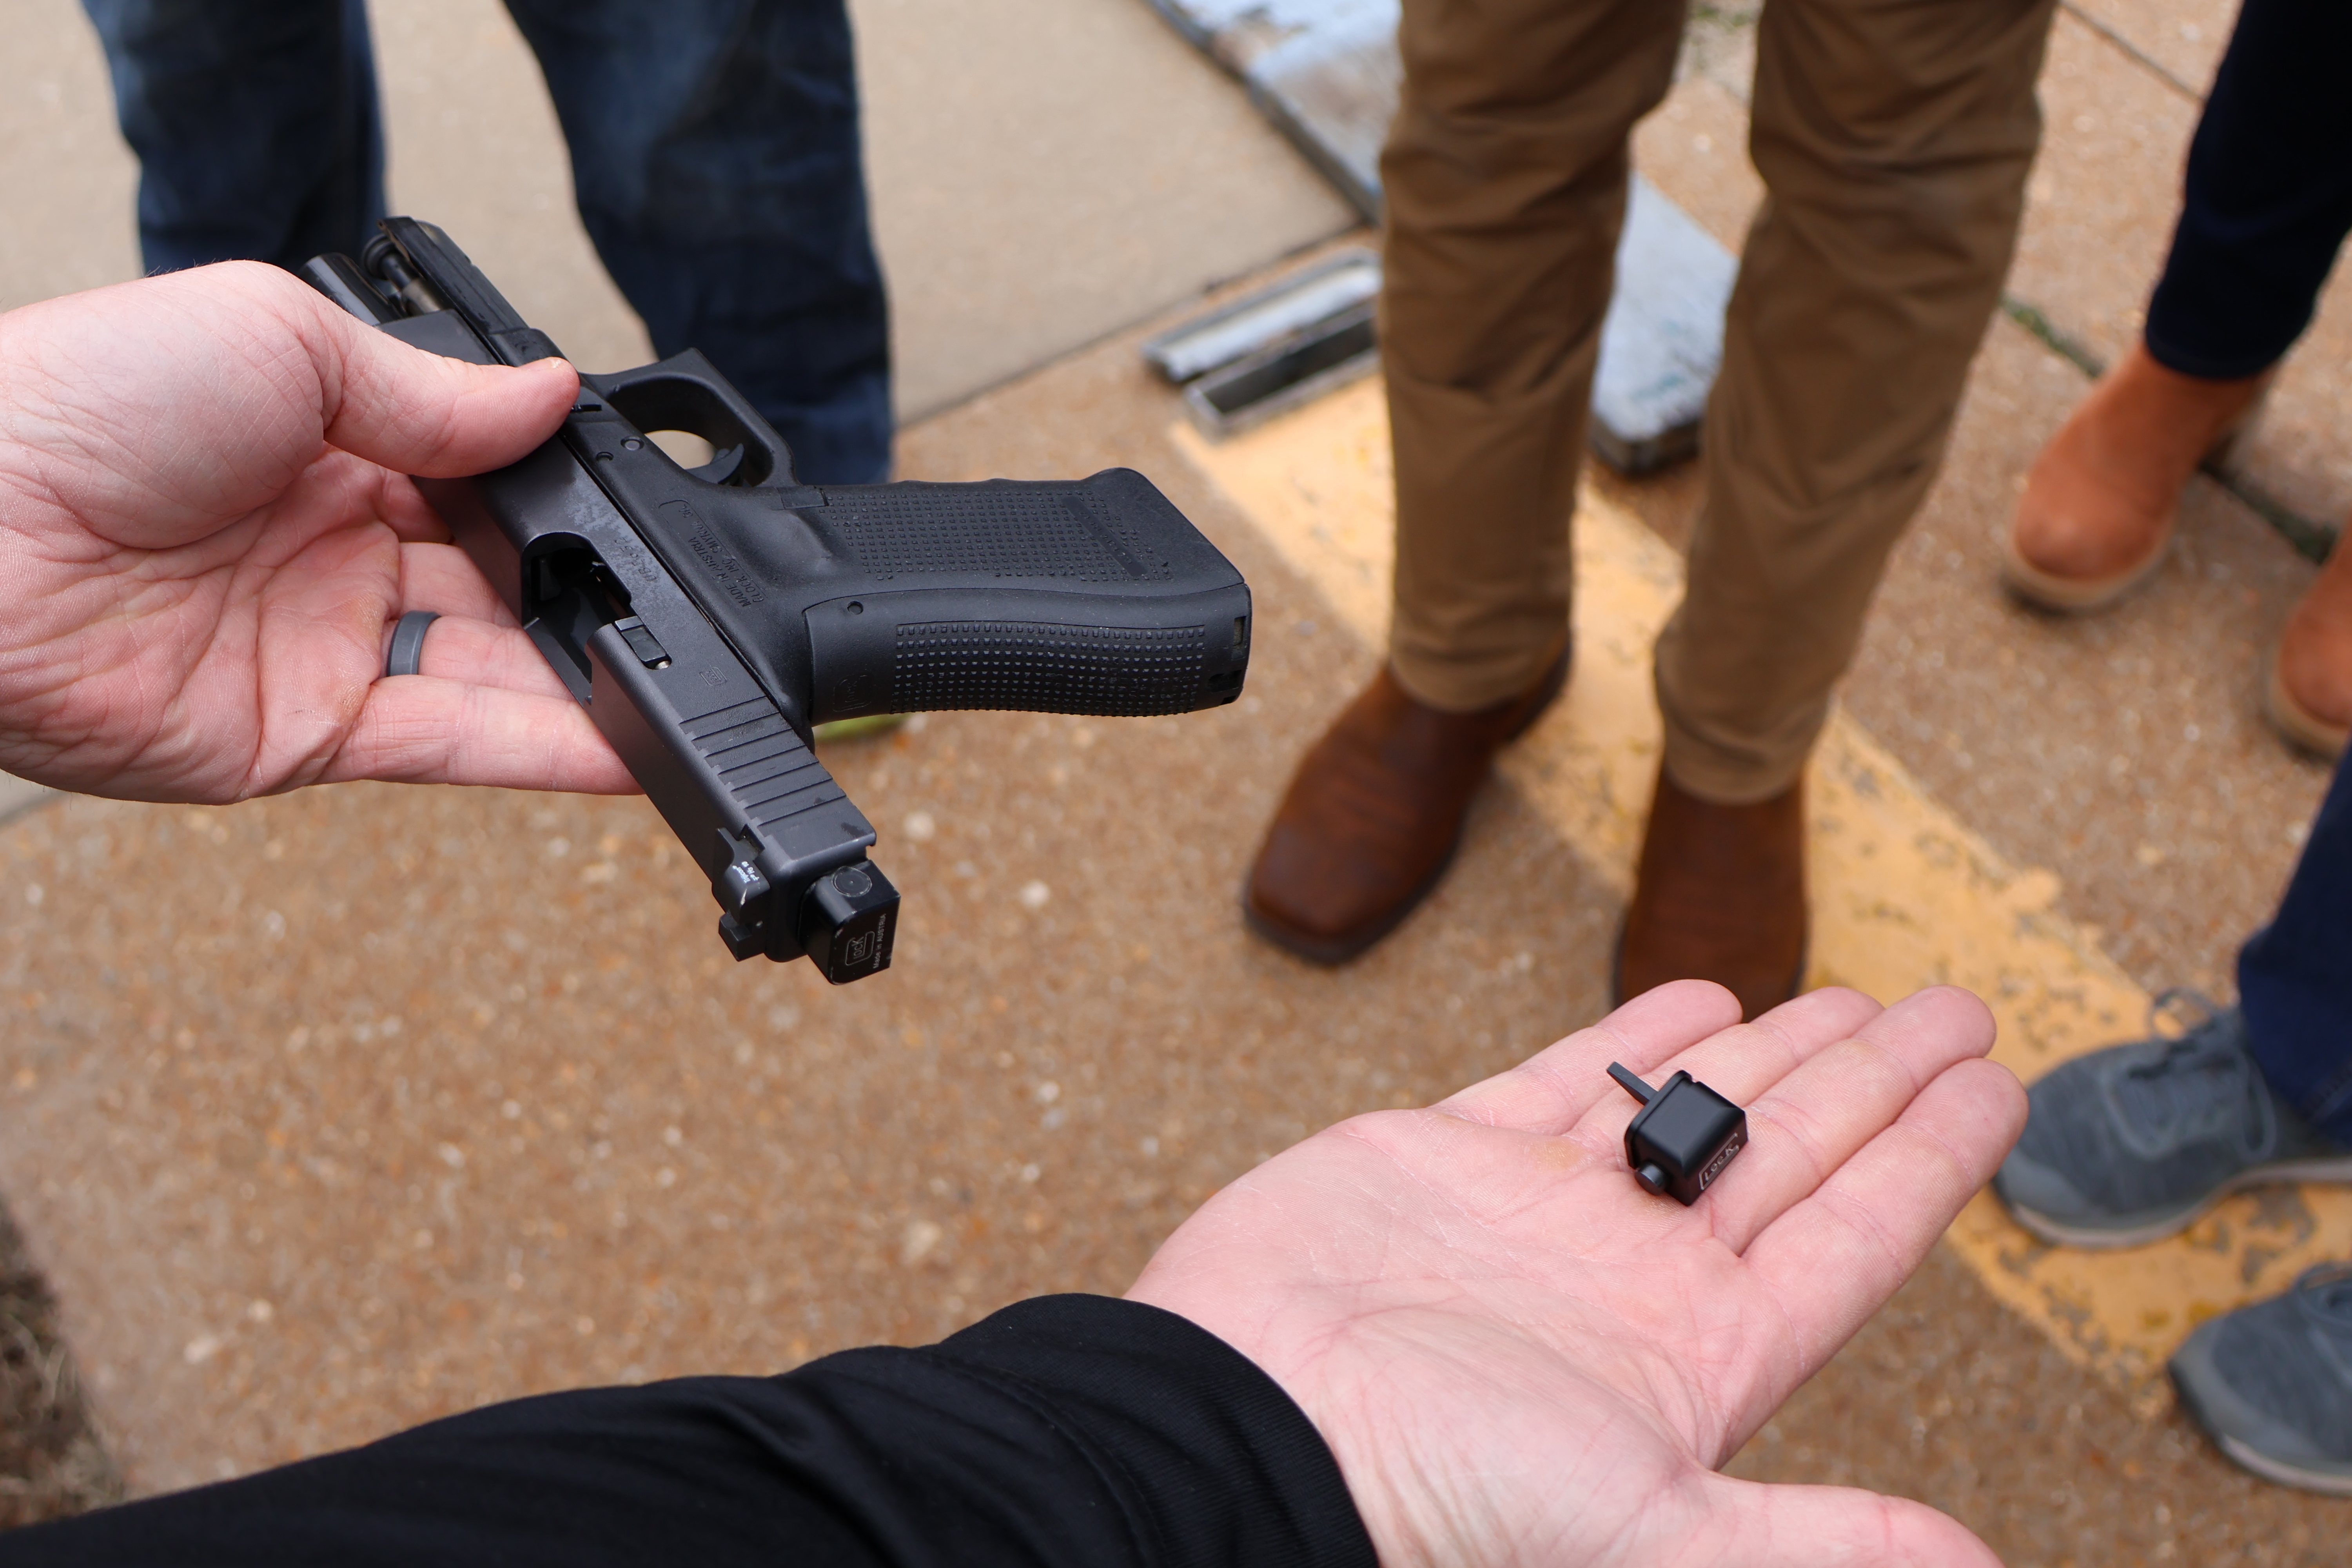 A person holding a firearm in one hand and a conversion device in their other hand.